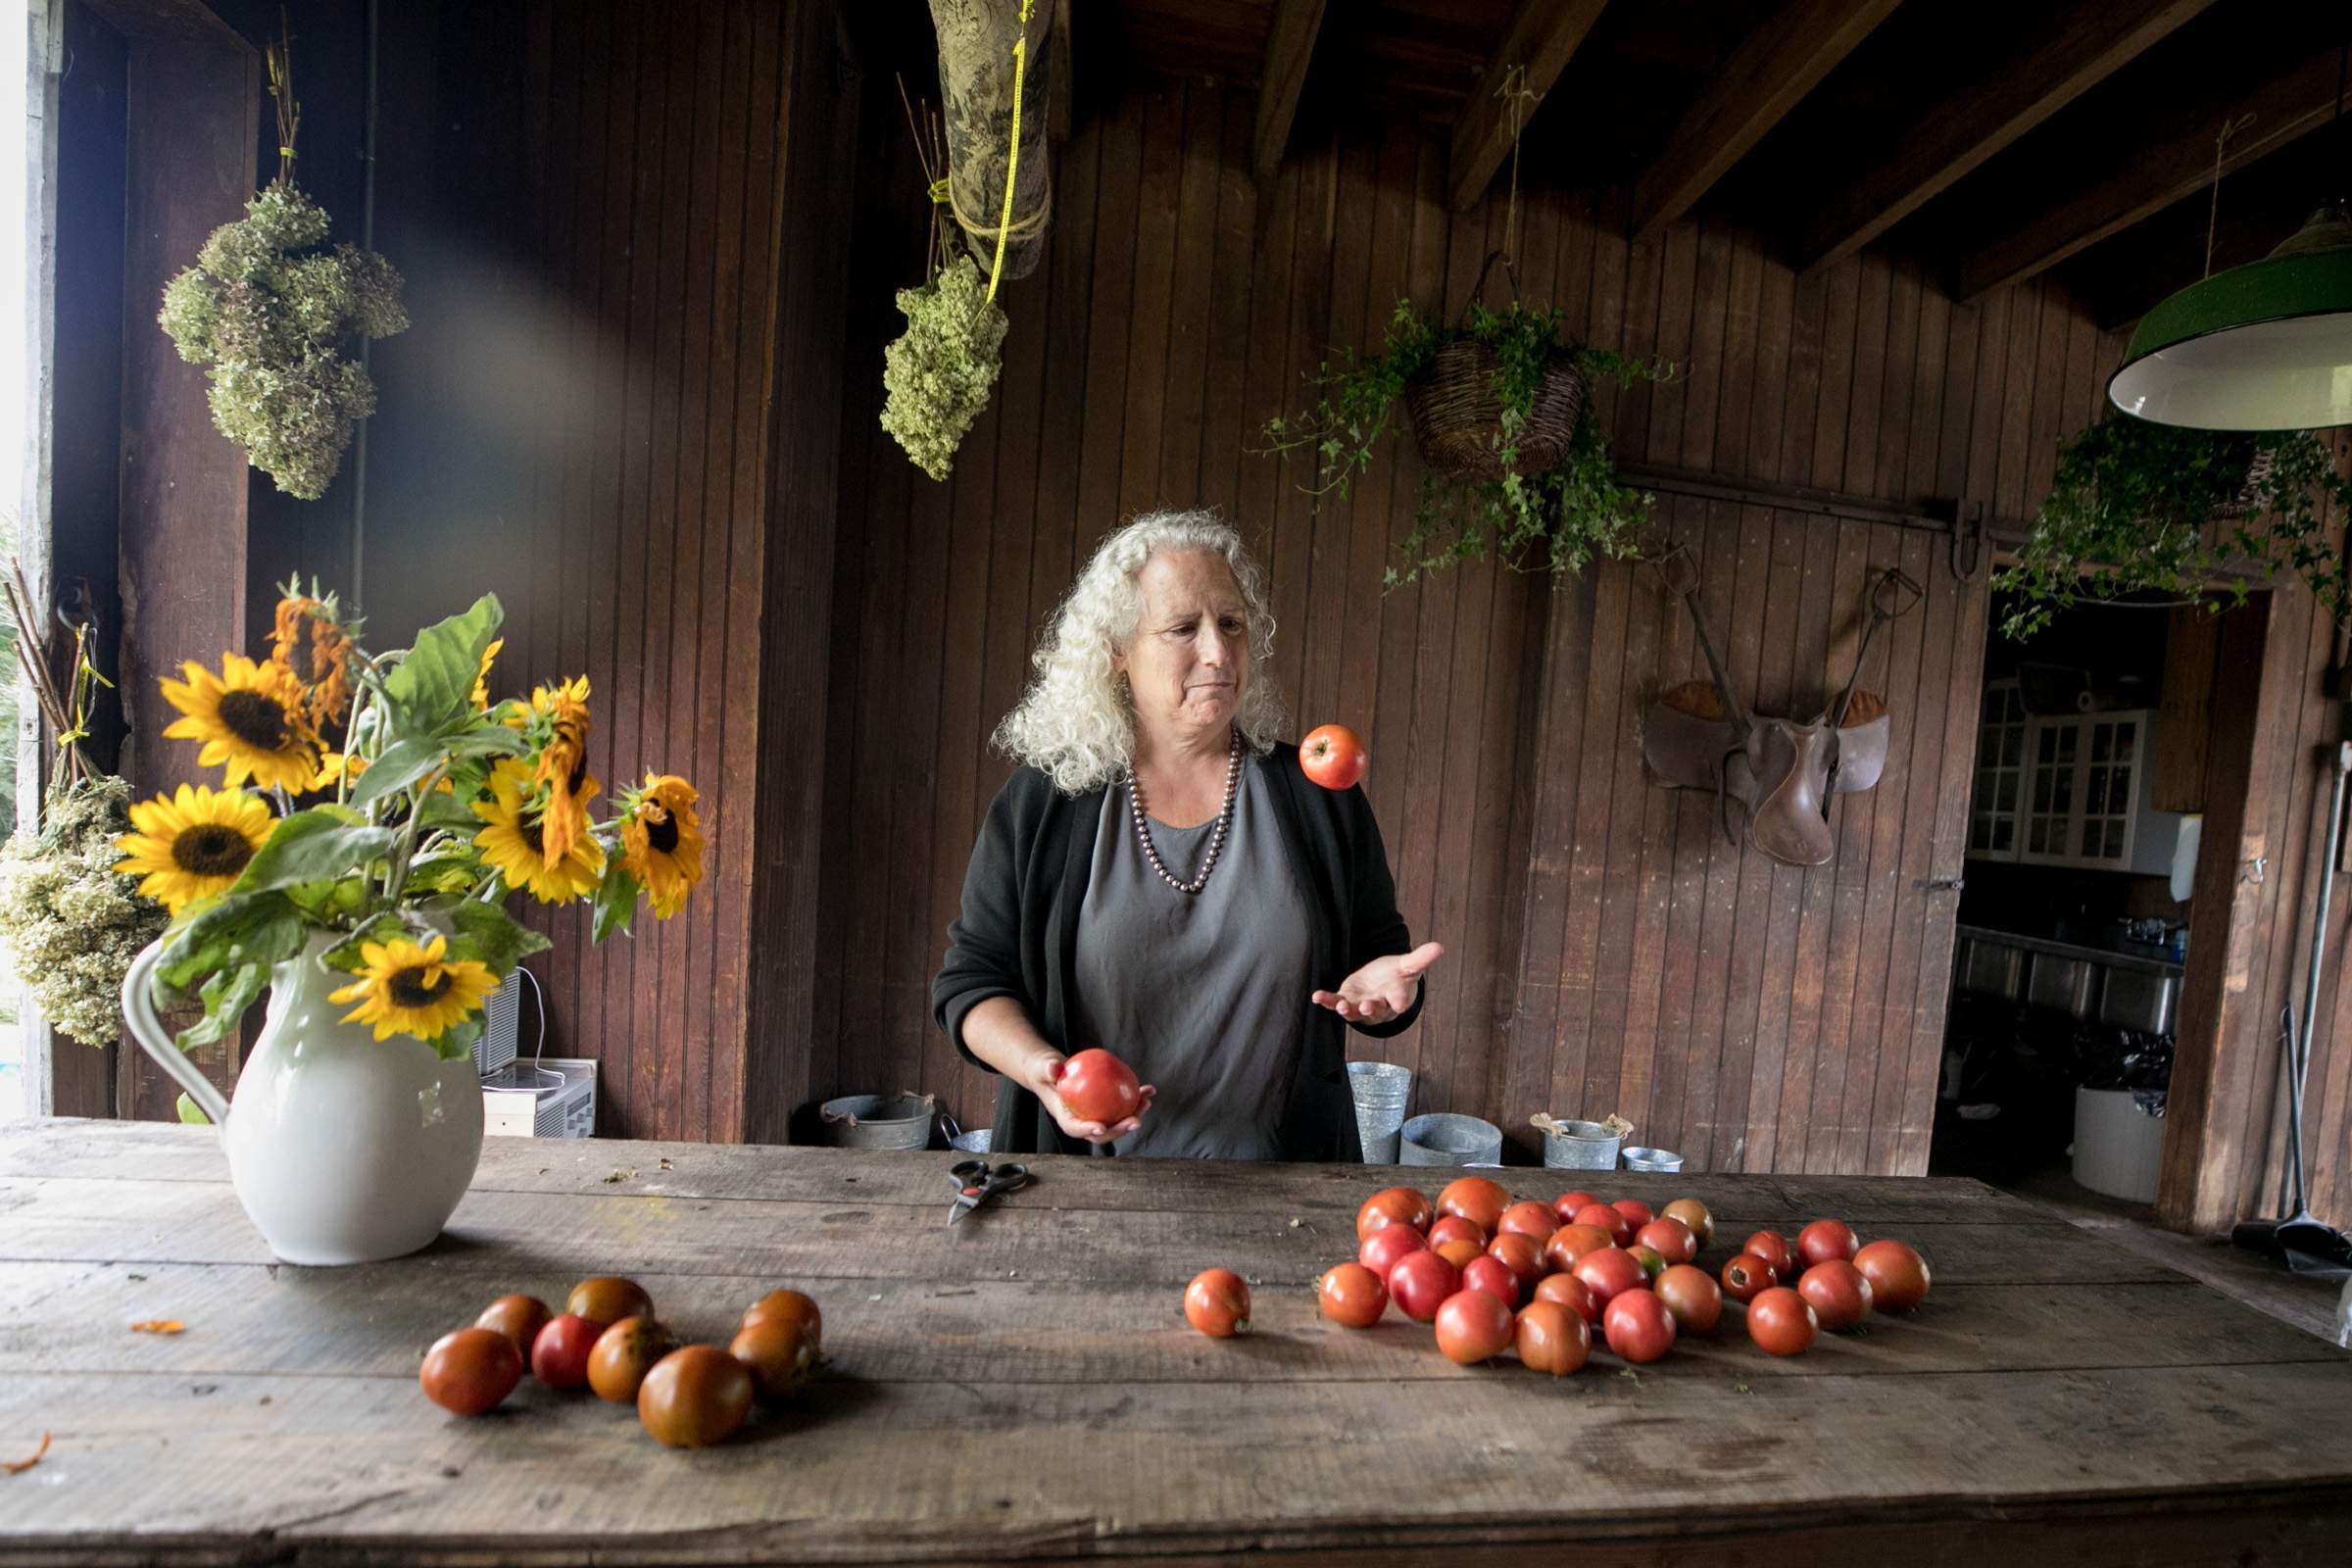 Susan Hito-Shapiro stands by a farm table covered in tomatoes and sunflowers at Goshen Green Farms.